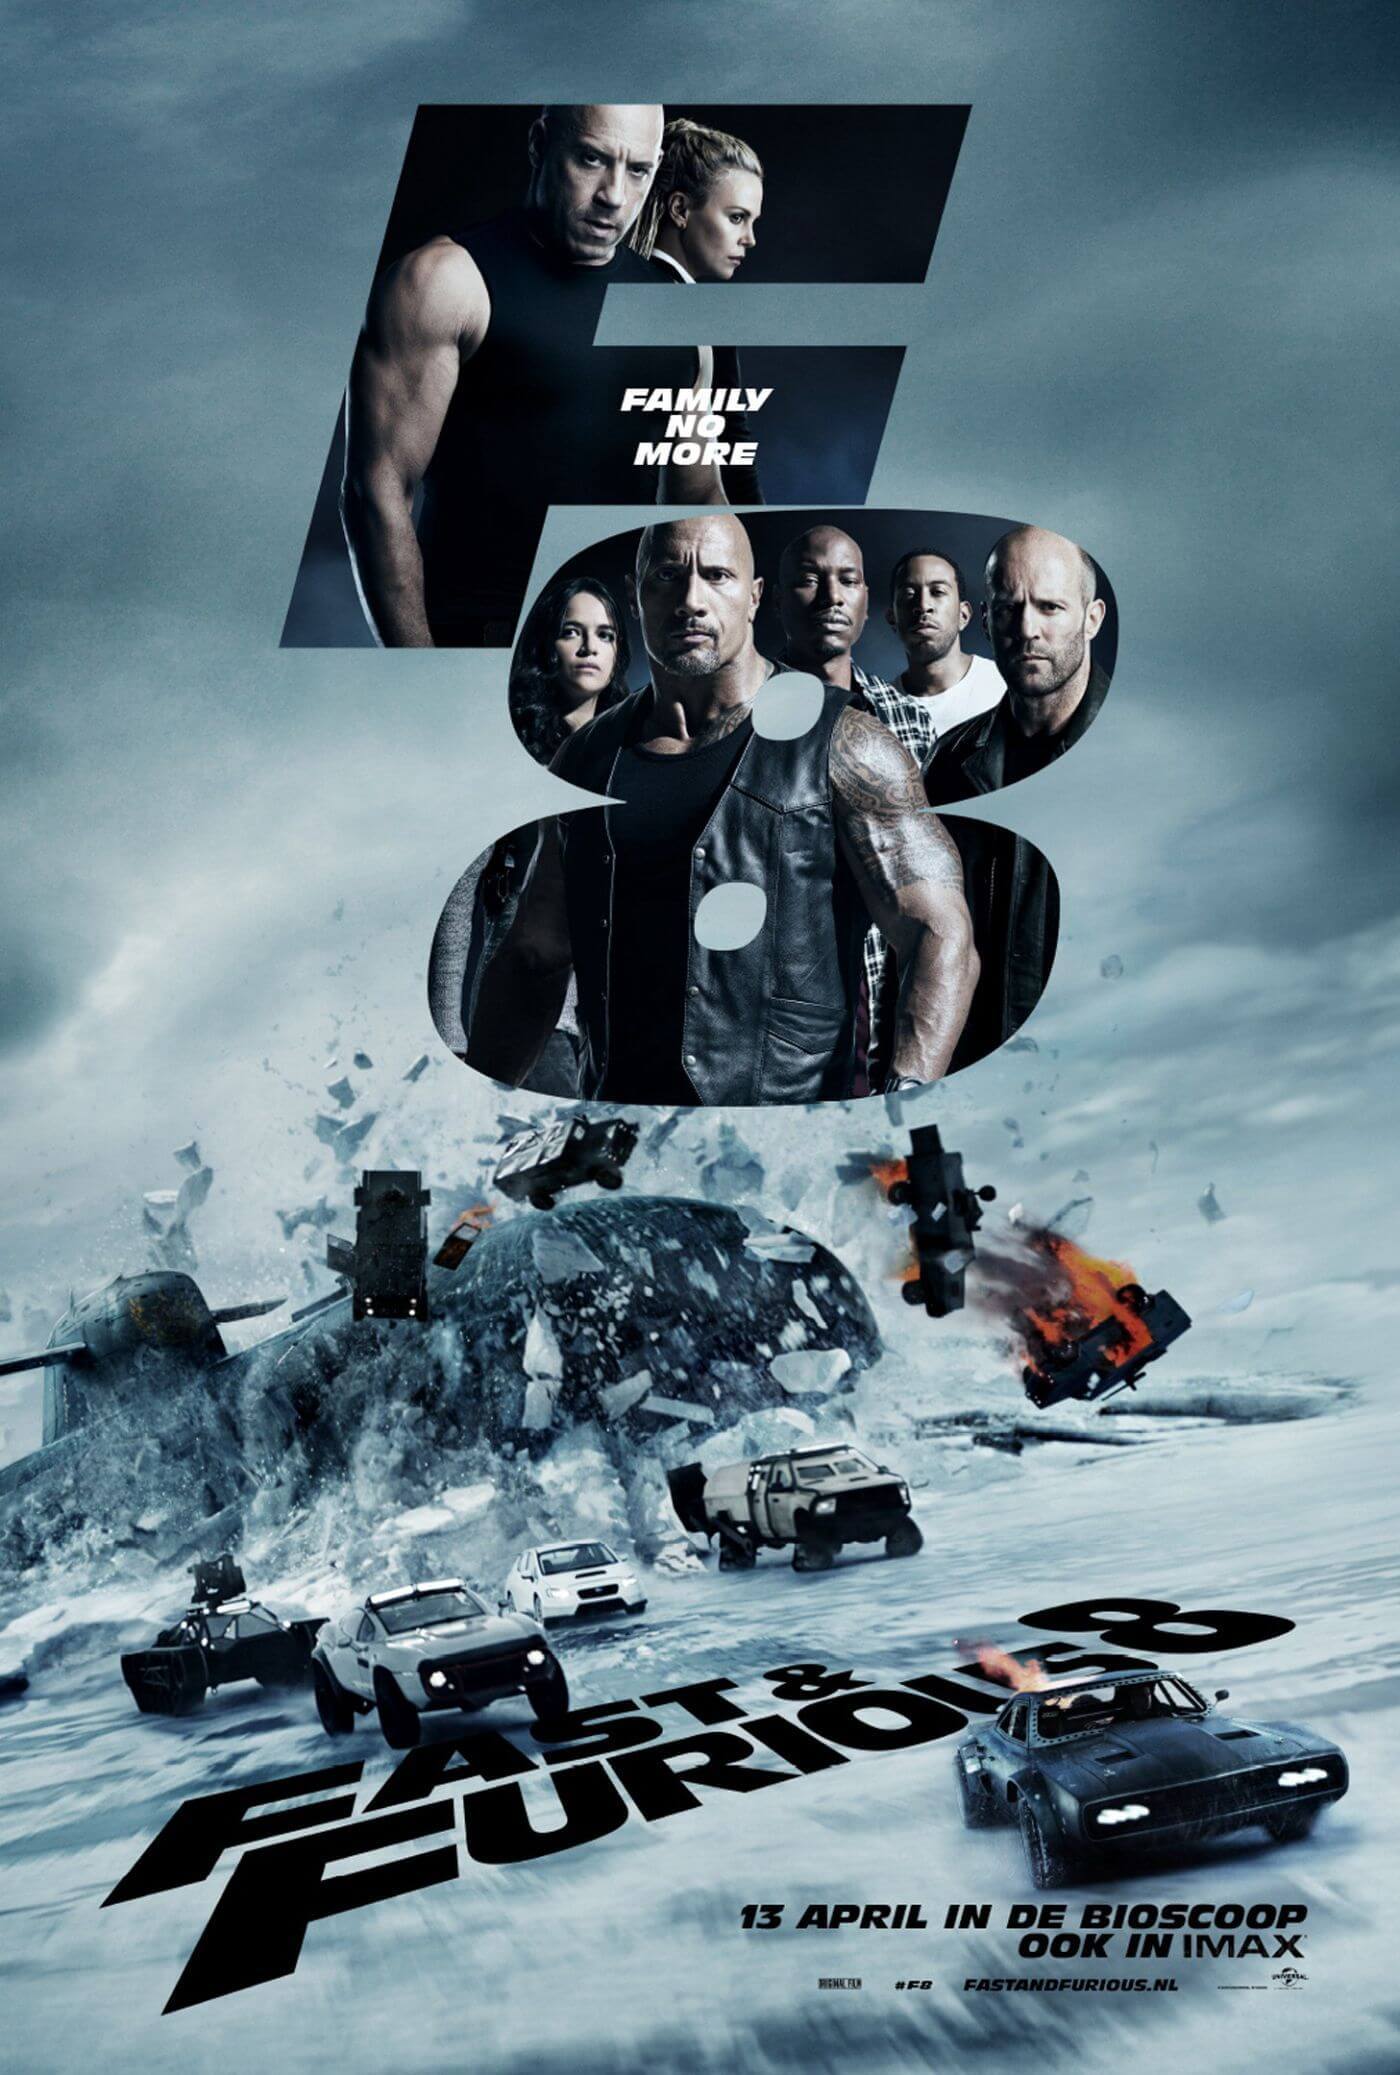 Fast & Furious 8 - Fate Of The Furious - Tallenge Hollywood Action Movie  Poster - Art Prints by Brian O'Conner | Buy Posters, Frames, Canvas &  Digital Art Prints | Small,